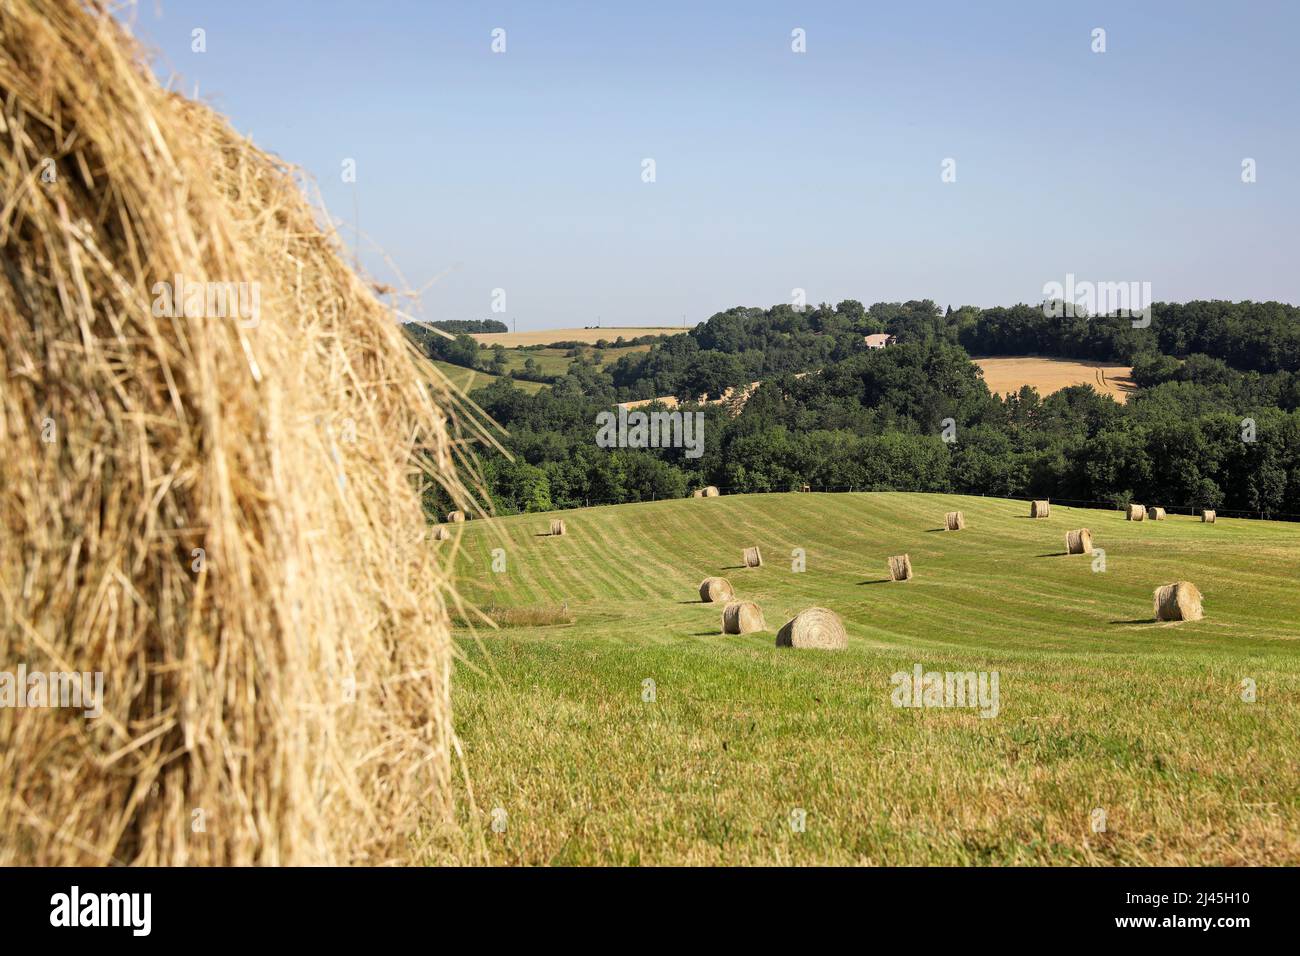 Rural, agricultural landscape in the Pays de Serre area, Quercy blanc (south-western France) Hay bales Stock Photo